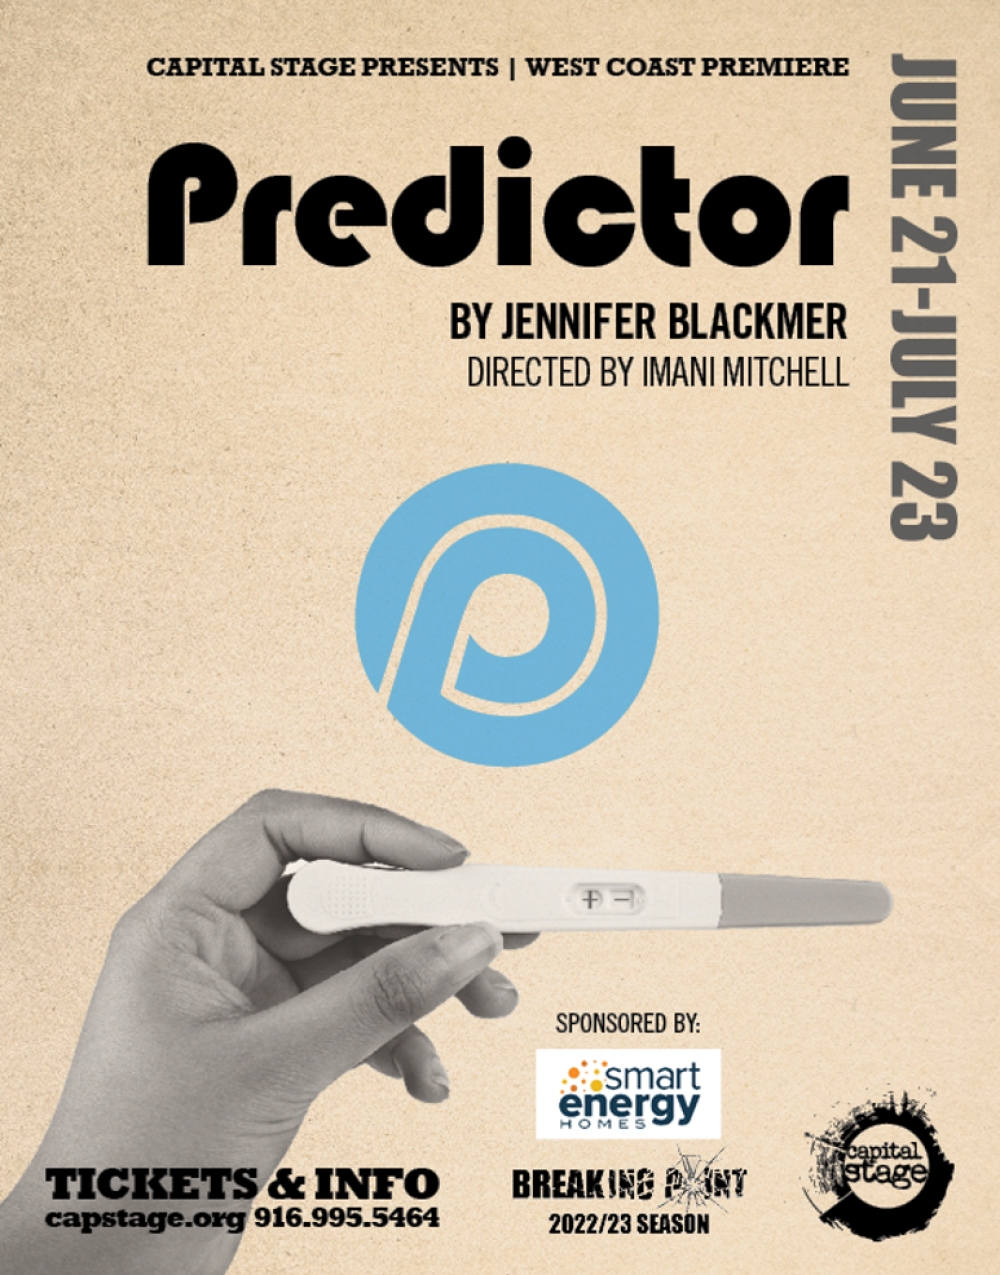 Predictor at Capital Stage